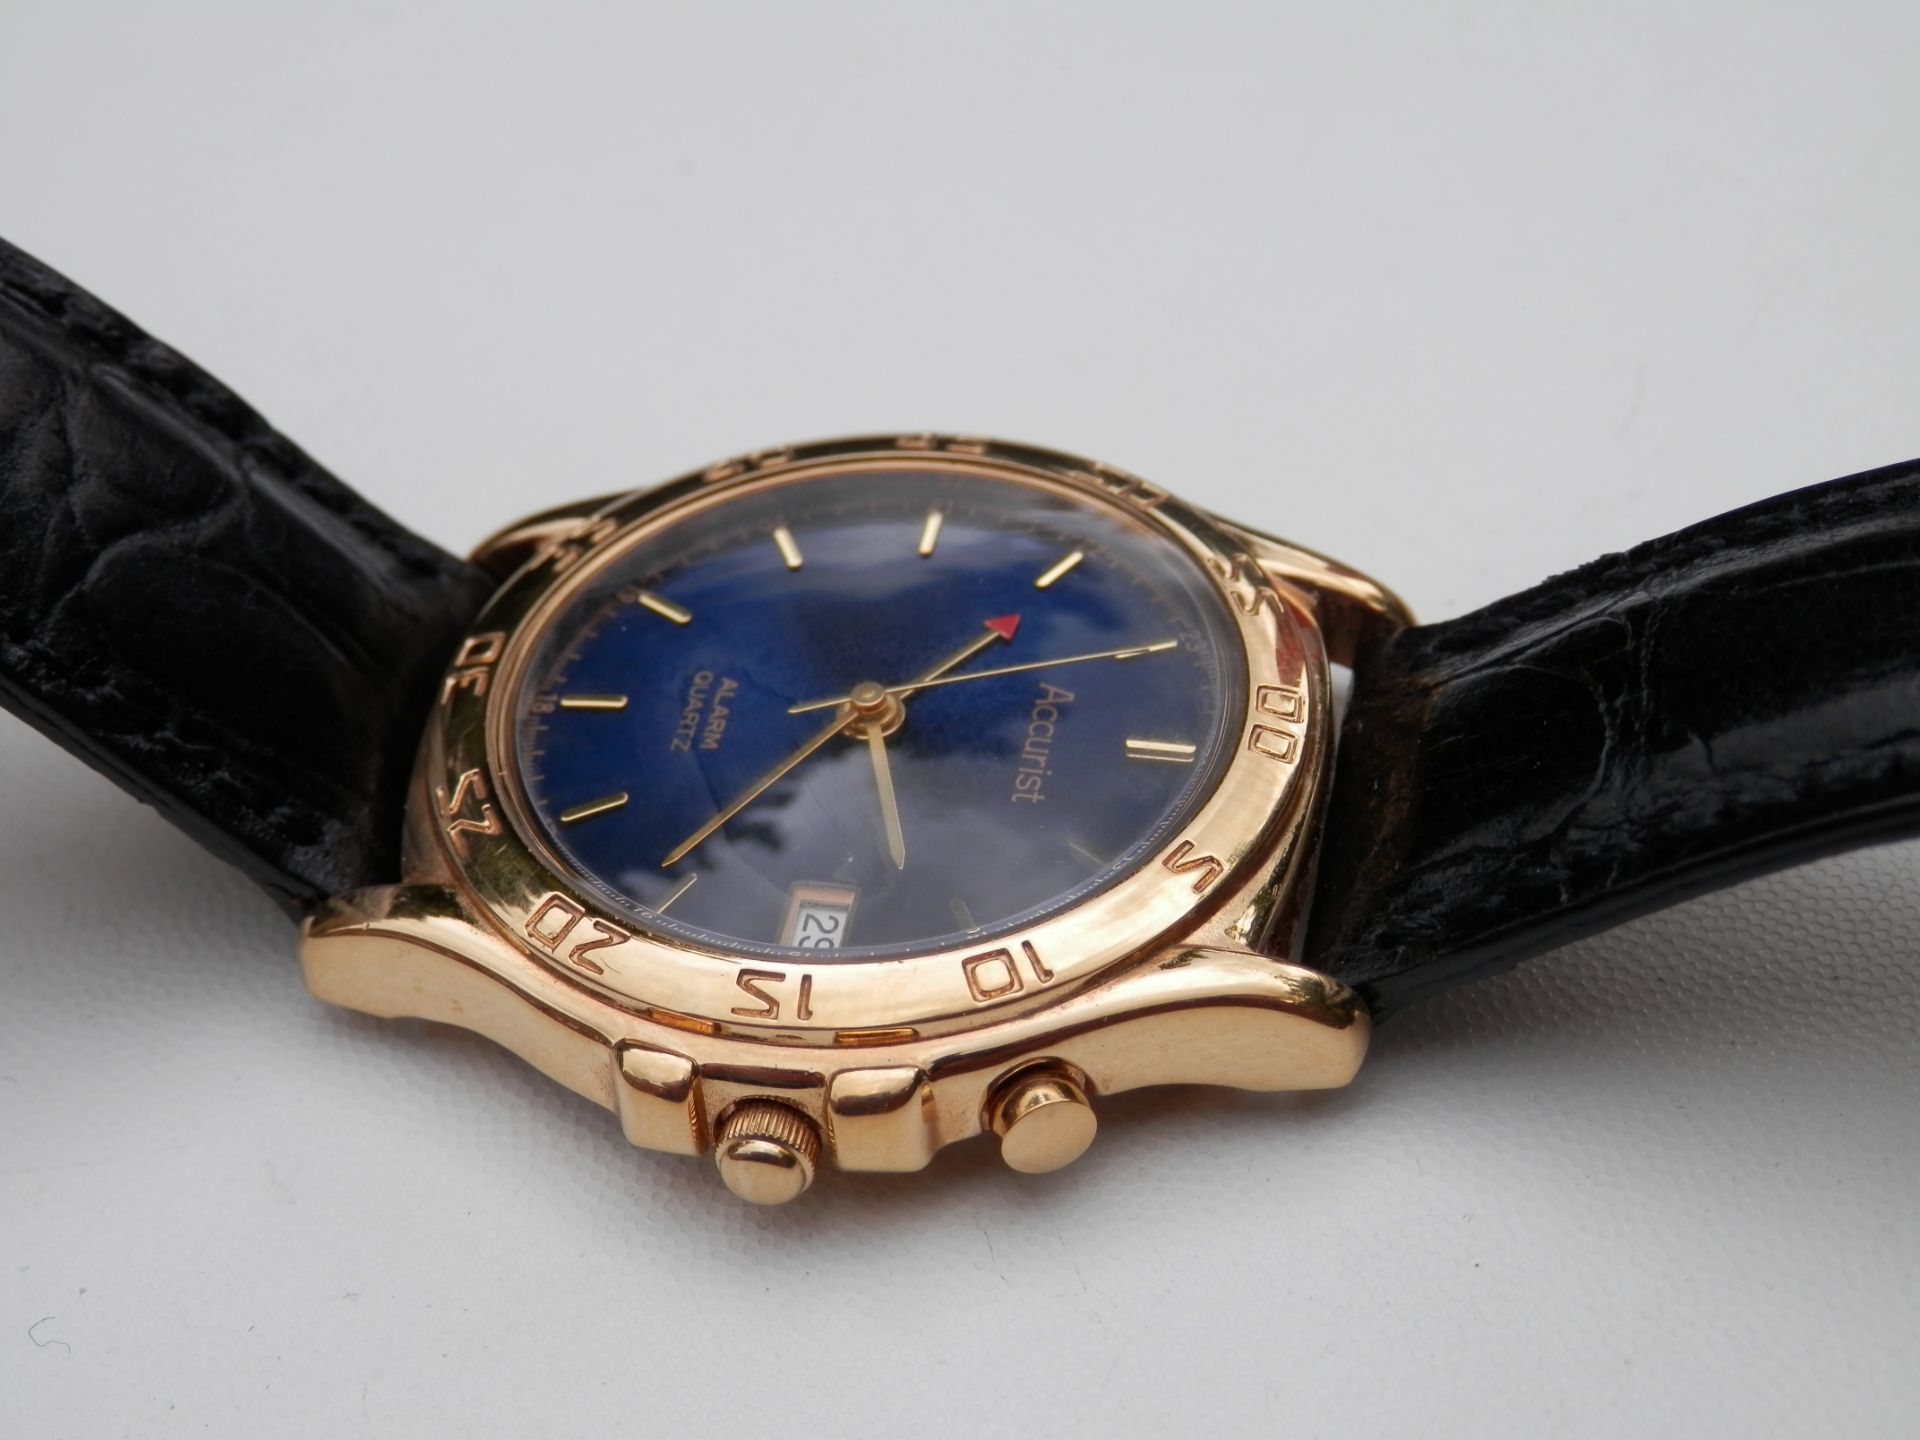 FULLY WORKING 1990S ACCURIST GENTS GOLD PLATED ANALOGUE ALARM QUARTZ WATCH, METALLIC BLUE DIAL. - Image 8 of 8